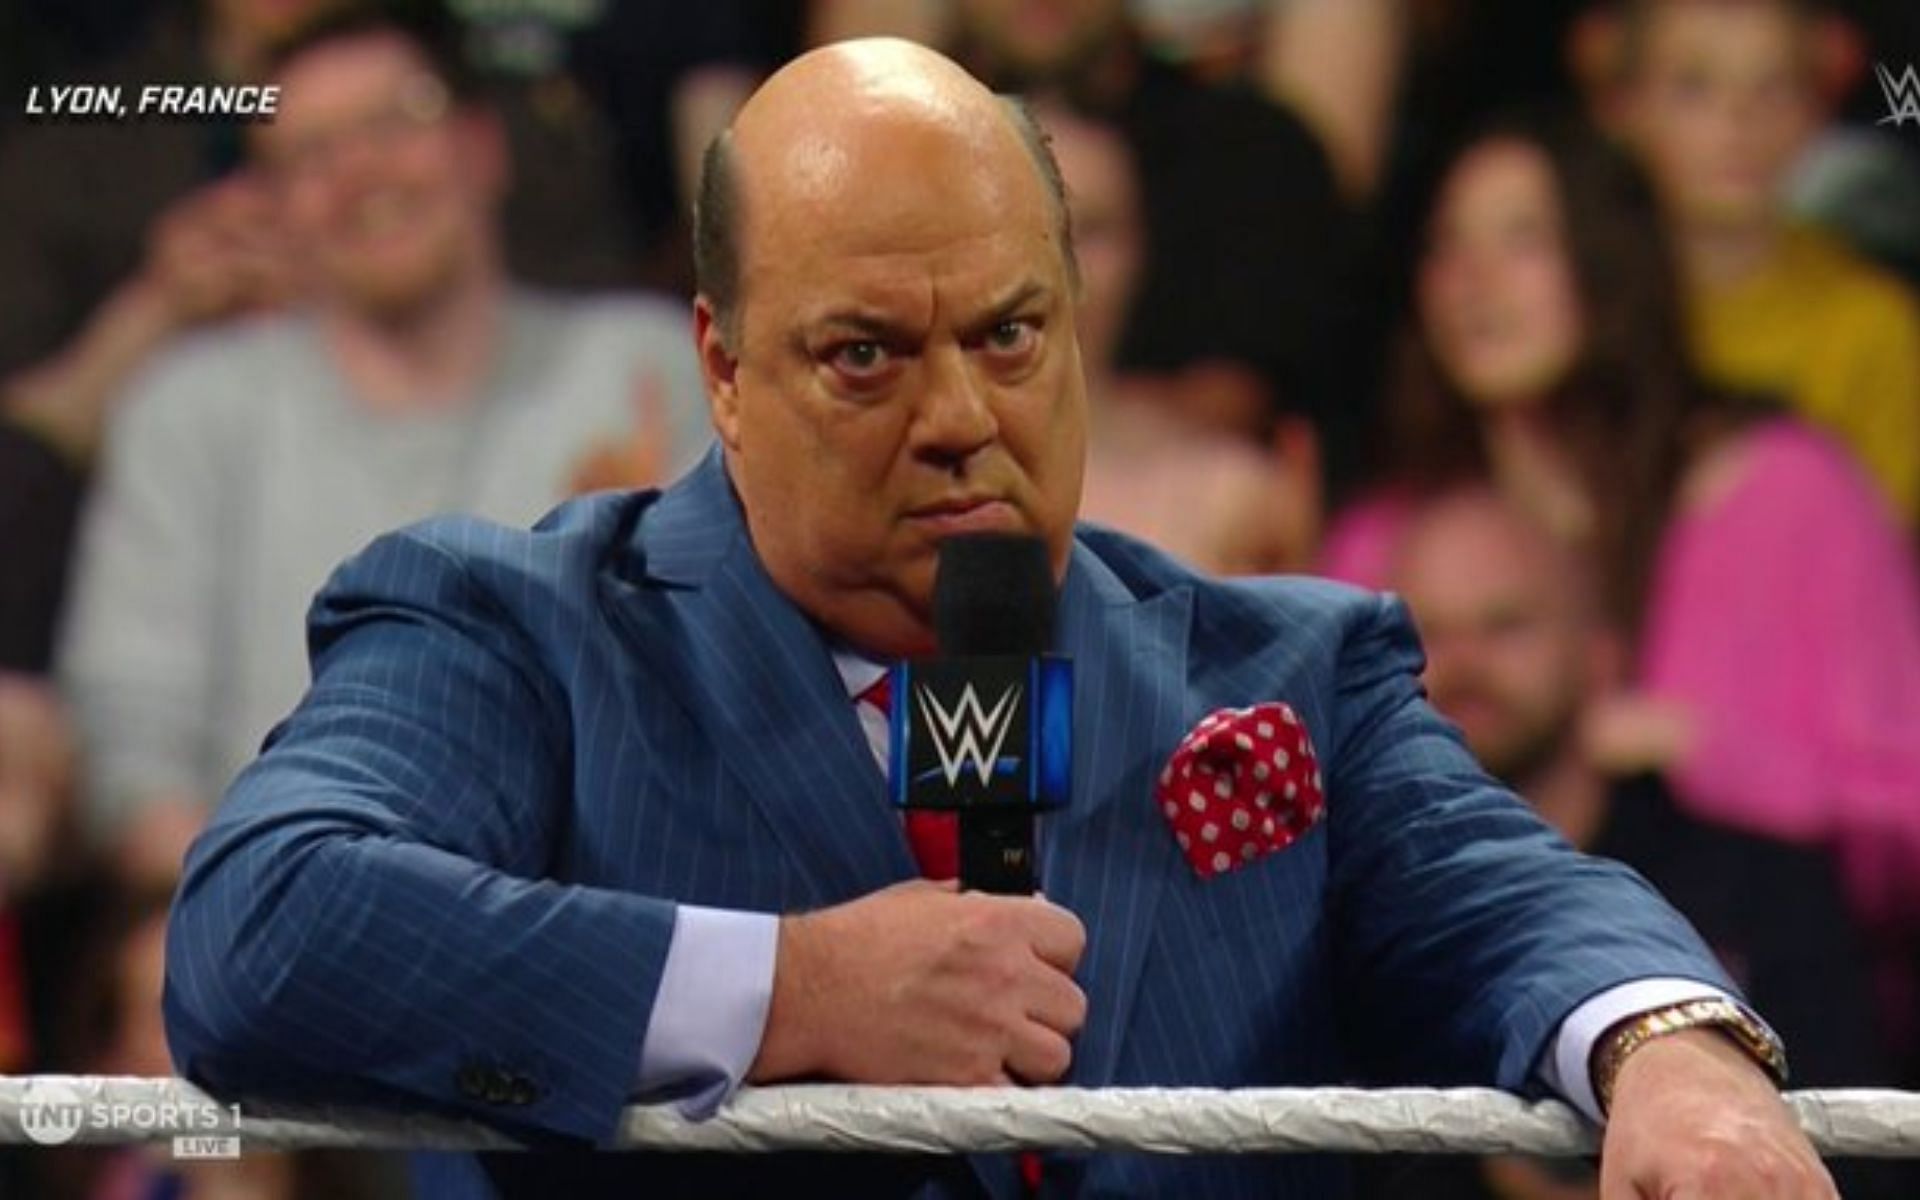 [VIDEO] Paul Heyman is hit with a 3-word chant from the audience in France on WWE SmackDown